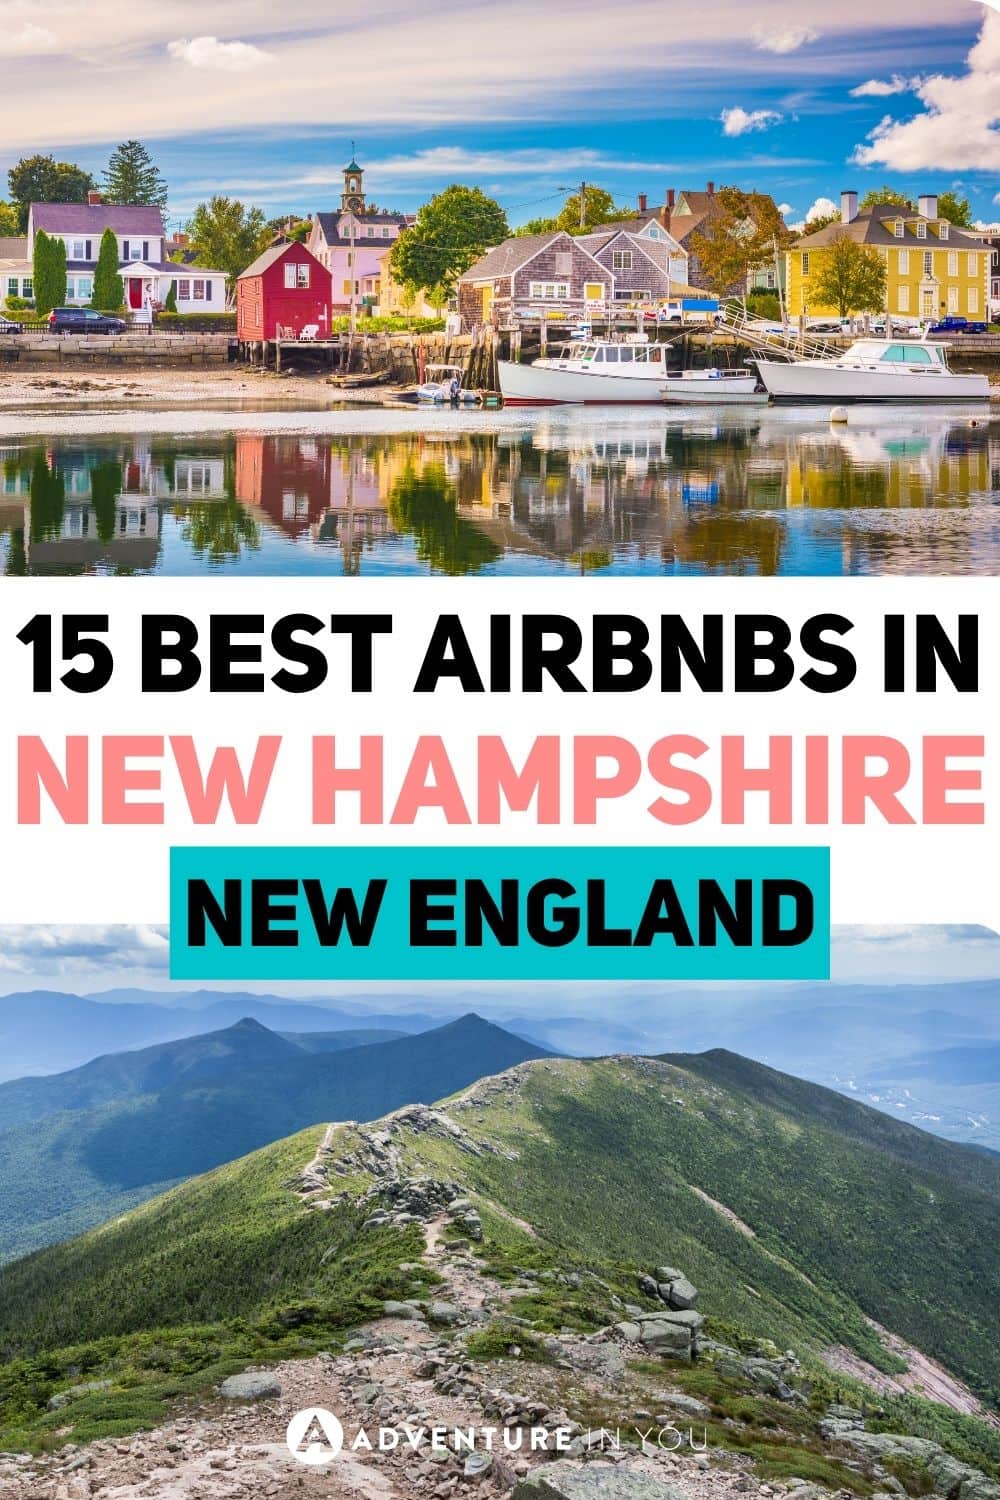 Airbnbs in New Hampshire | Looking for the best Airbnbs in New Hampshire Click here to see our top picks. #usa #newengland #newhampshire #wheretostayinnewhampshire